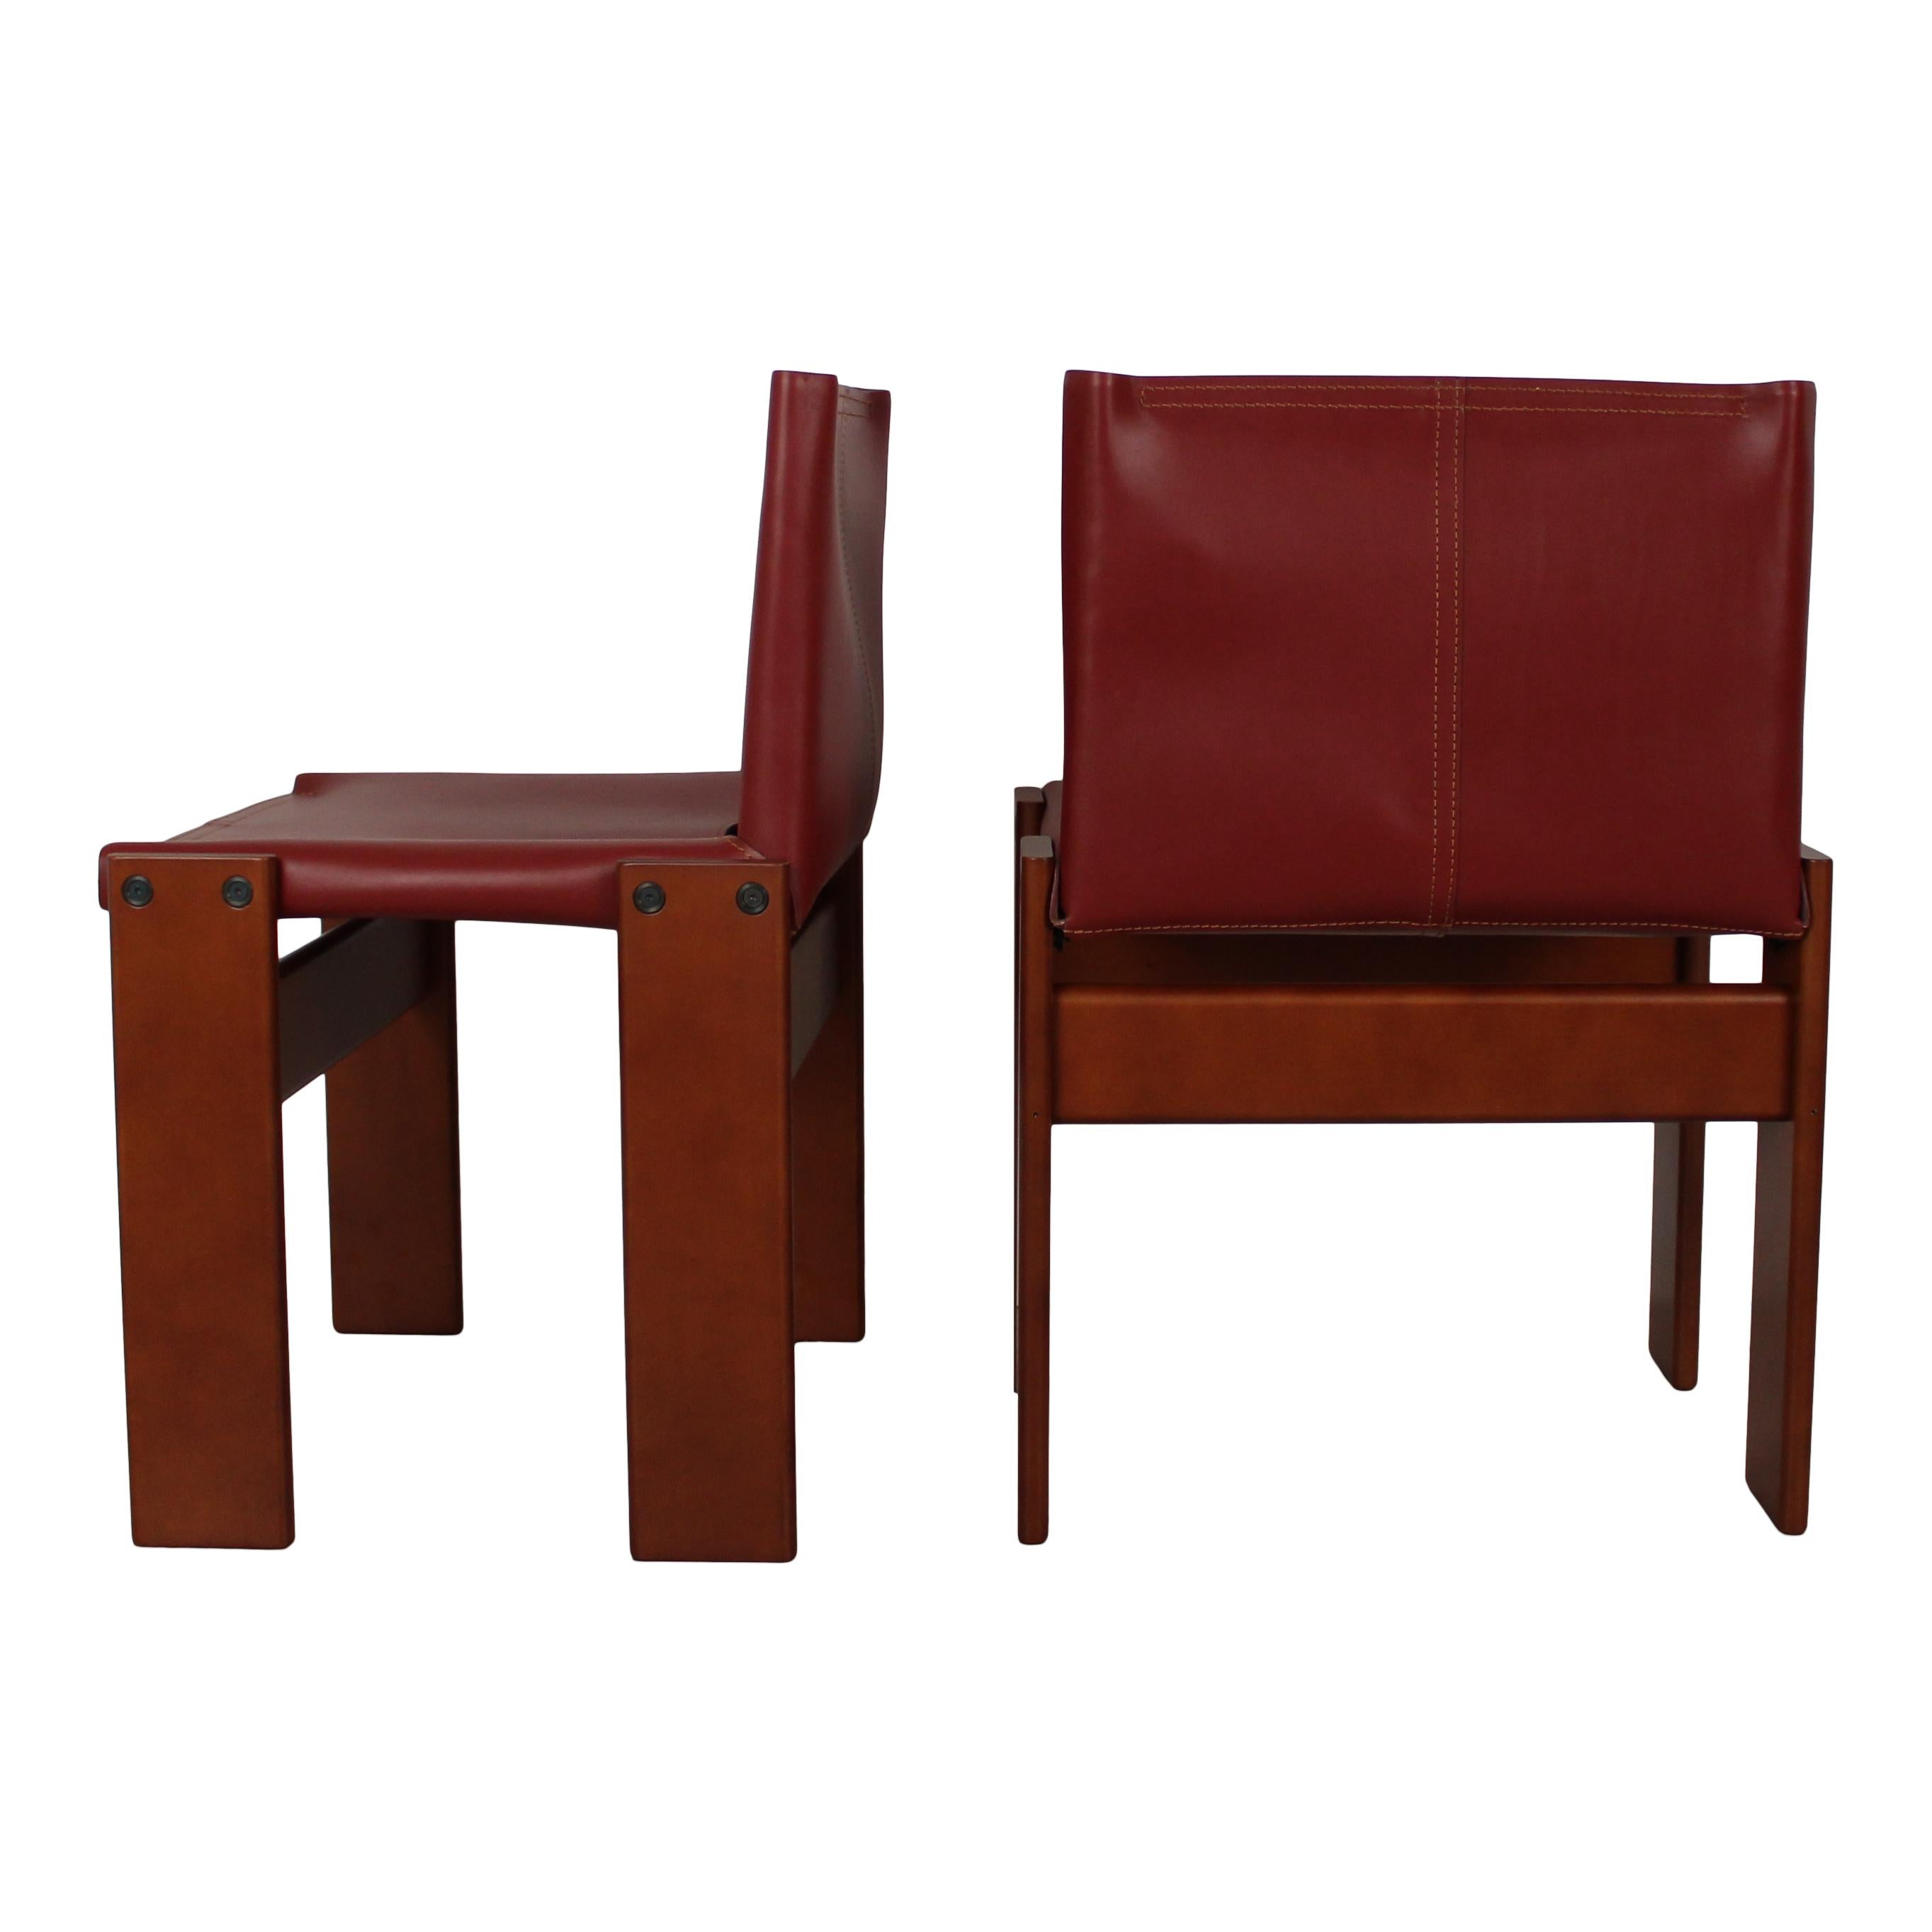 Afra & Tobia Scarpa English Red  Leather Monk Dining Chair for Molteni, Set of 4 For Sale 6